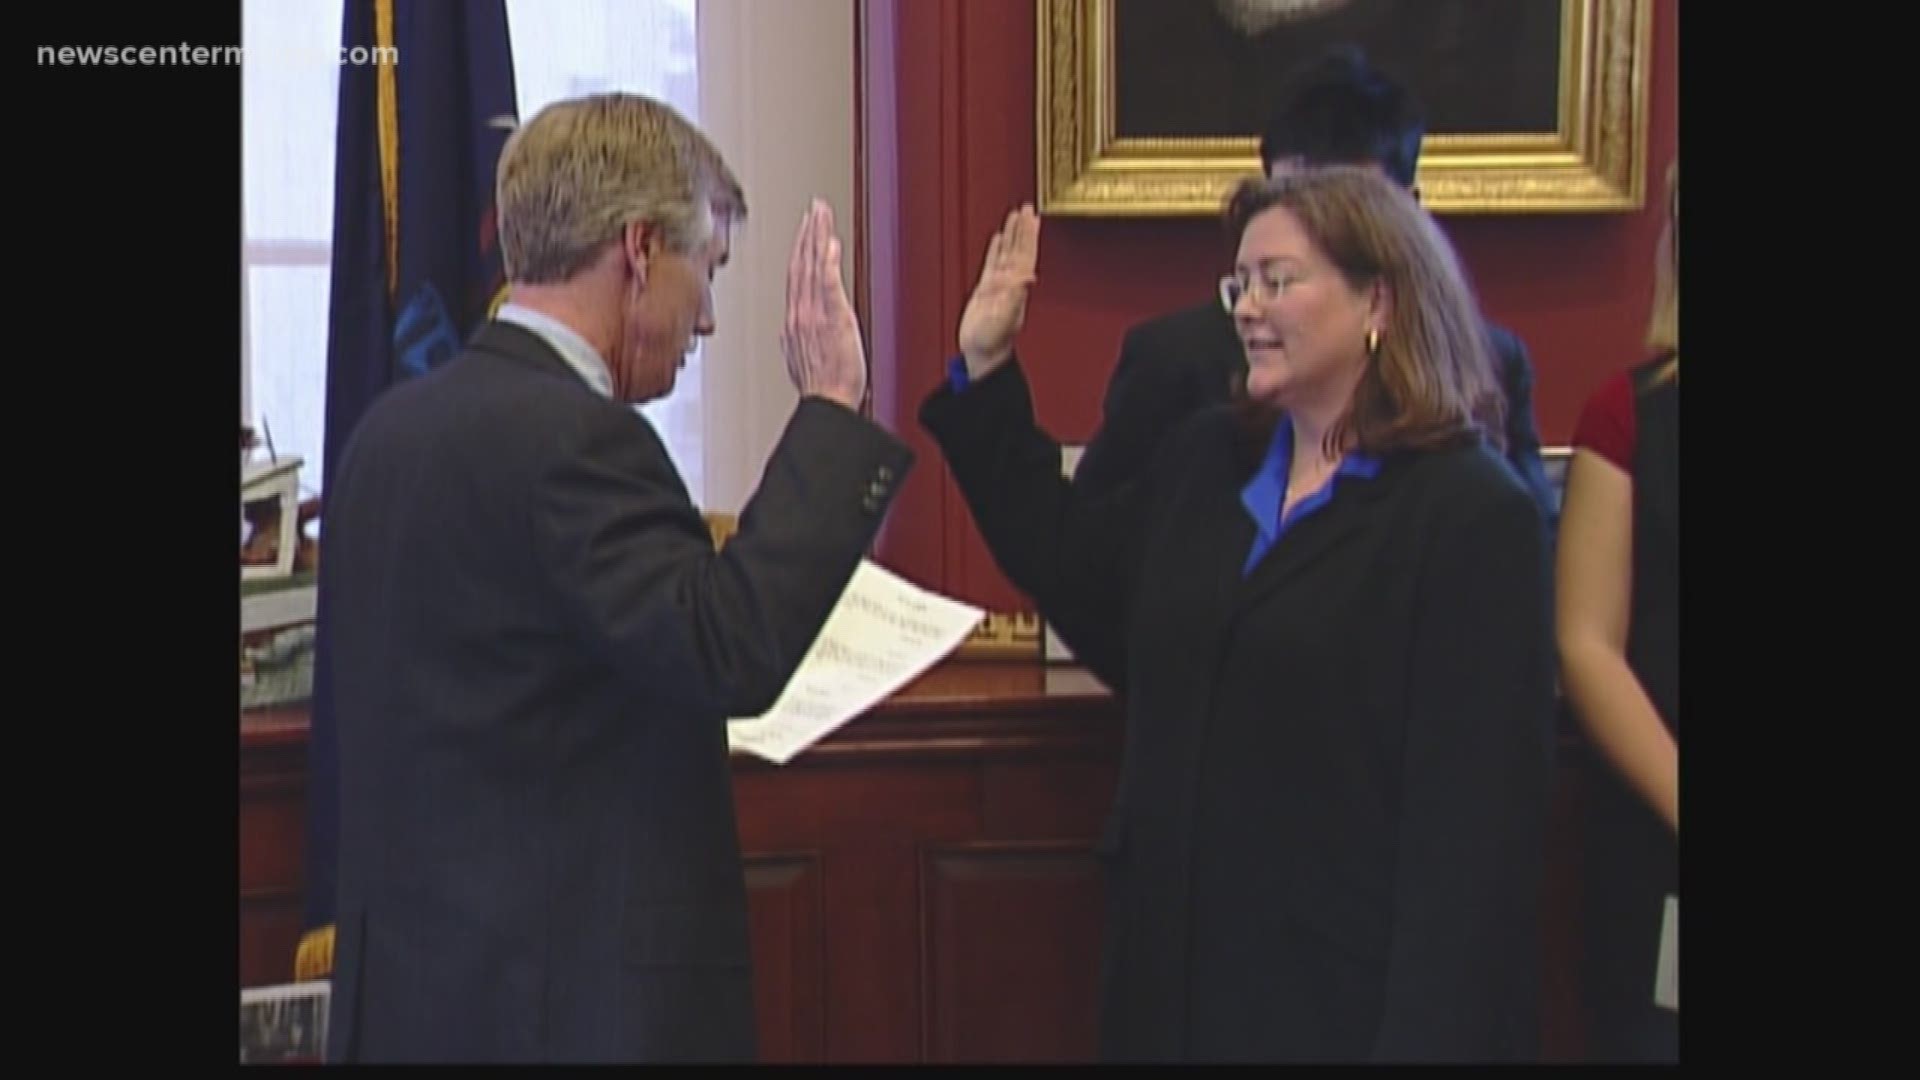 Governor King appointed her to the position to bring change to the court. Saufley says she was terrified starting out, but now she says she has the best job in the world.